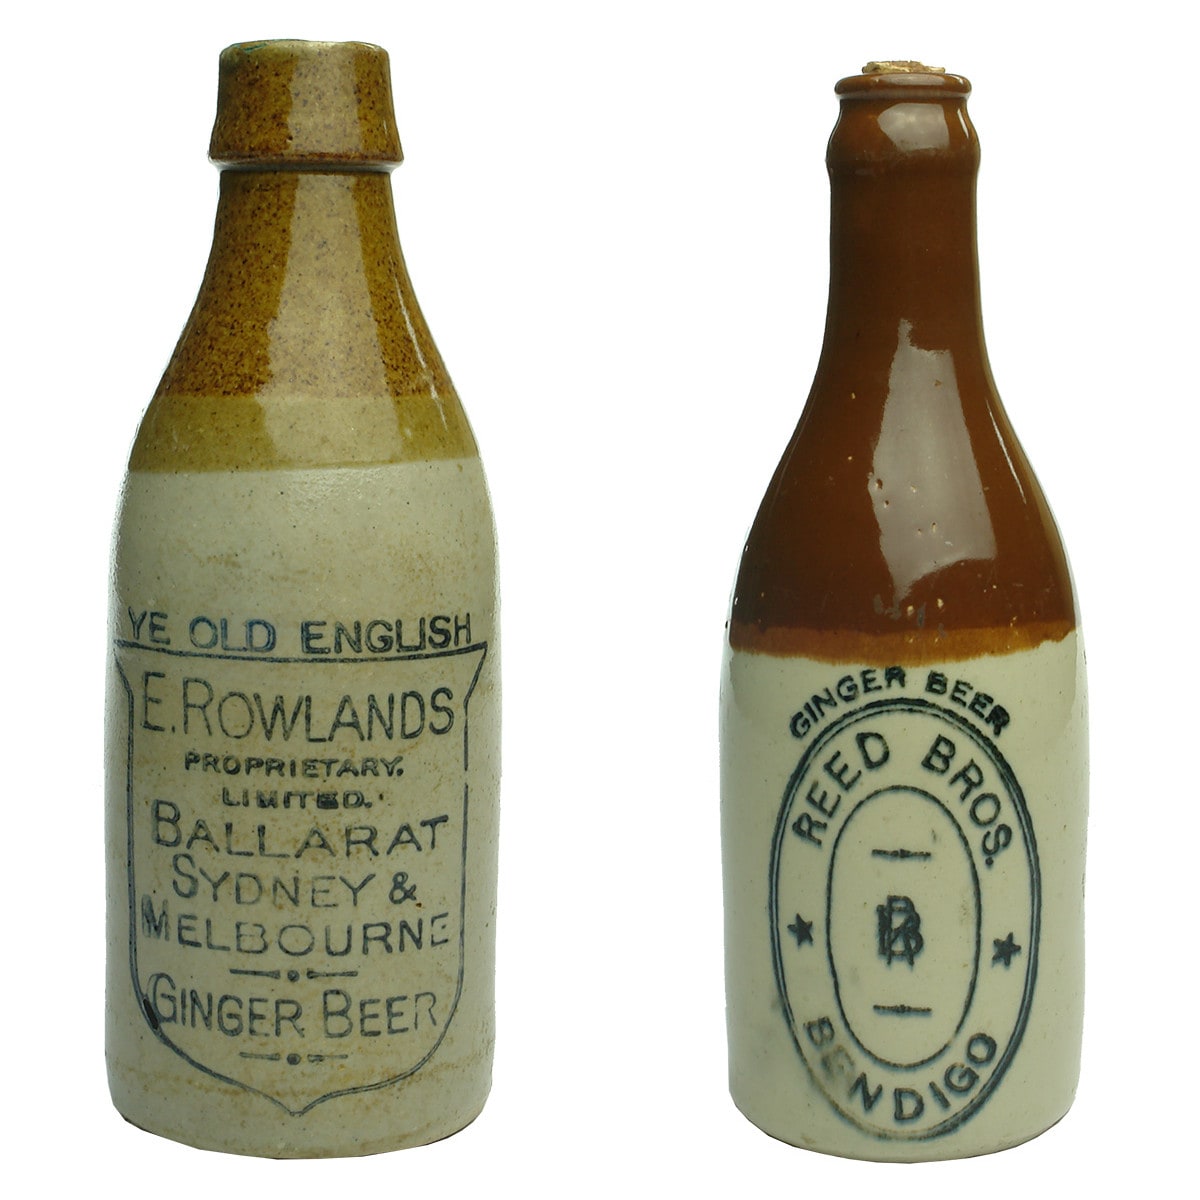 Two Ginger Beers. E. Rowlands Pty Ltd, Ballarat, Sydney & Melbourne and Reed Bros., Bendigo. (Victoria & New South Wales)